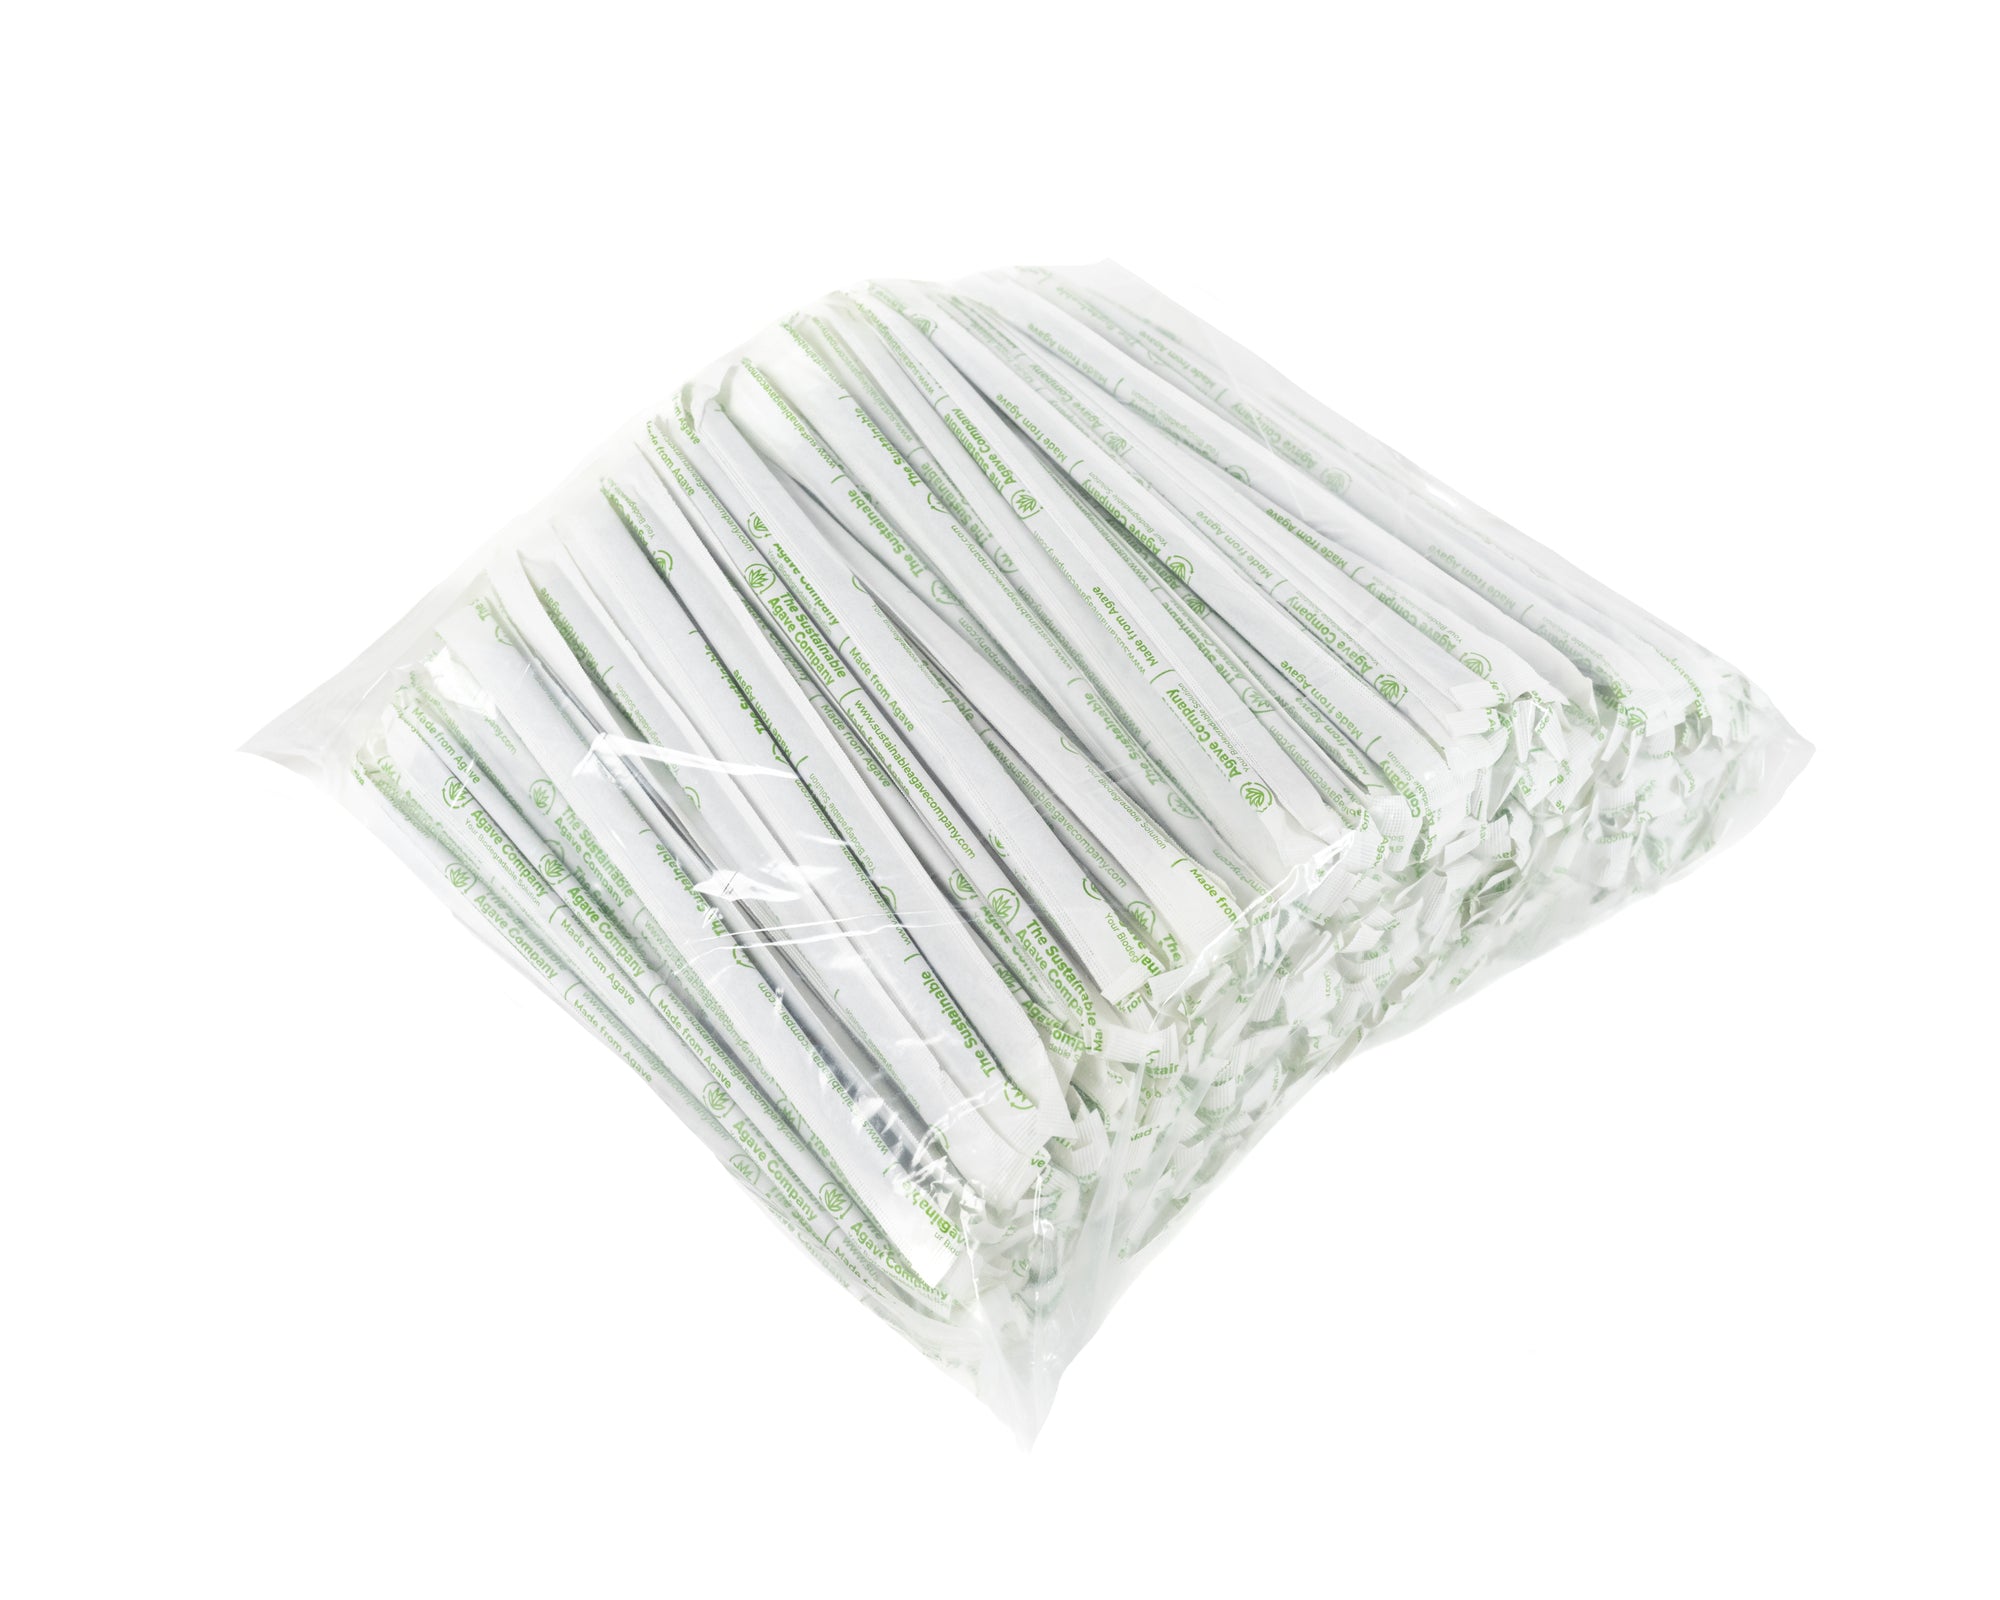 Bundle of Paper Wrapped Straws in Bag